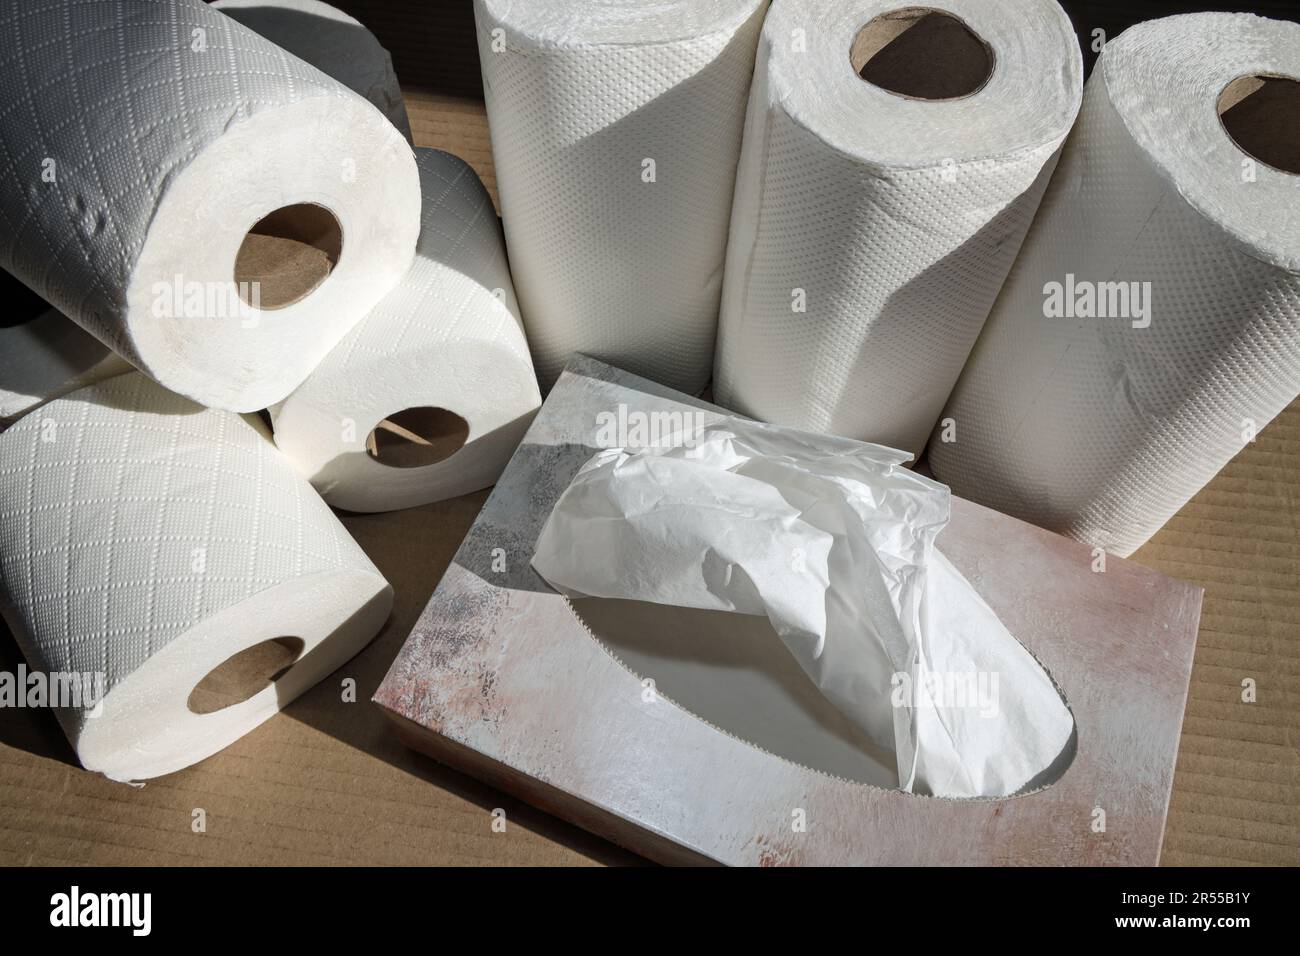 Household paper products, toilet rolls, kitchen paper and tissues all white and non branded. Responsible pulp and paper operations can bring benefits Stock Photo